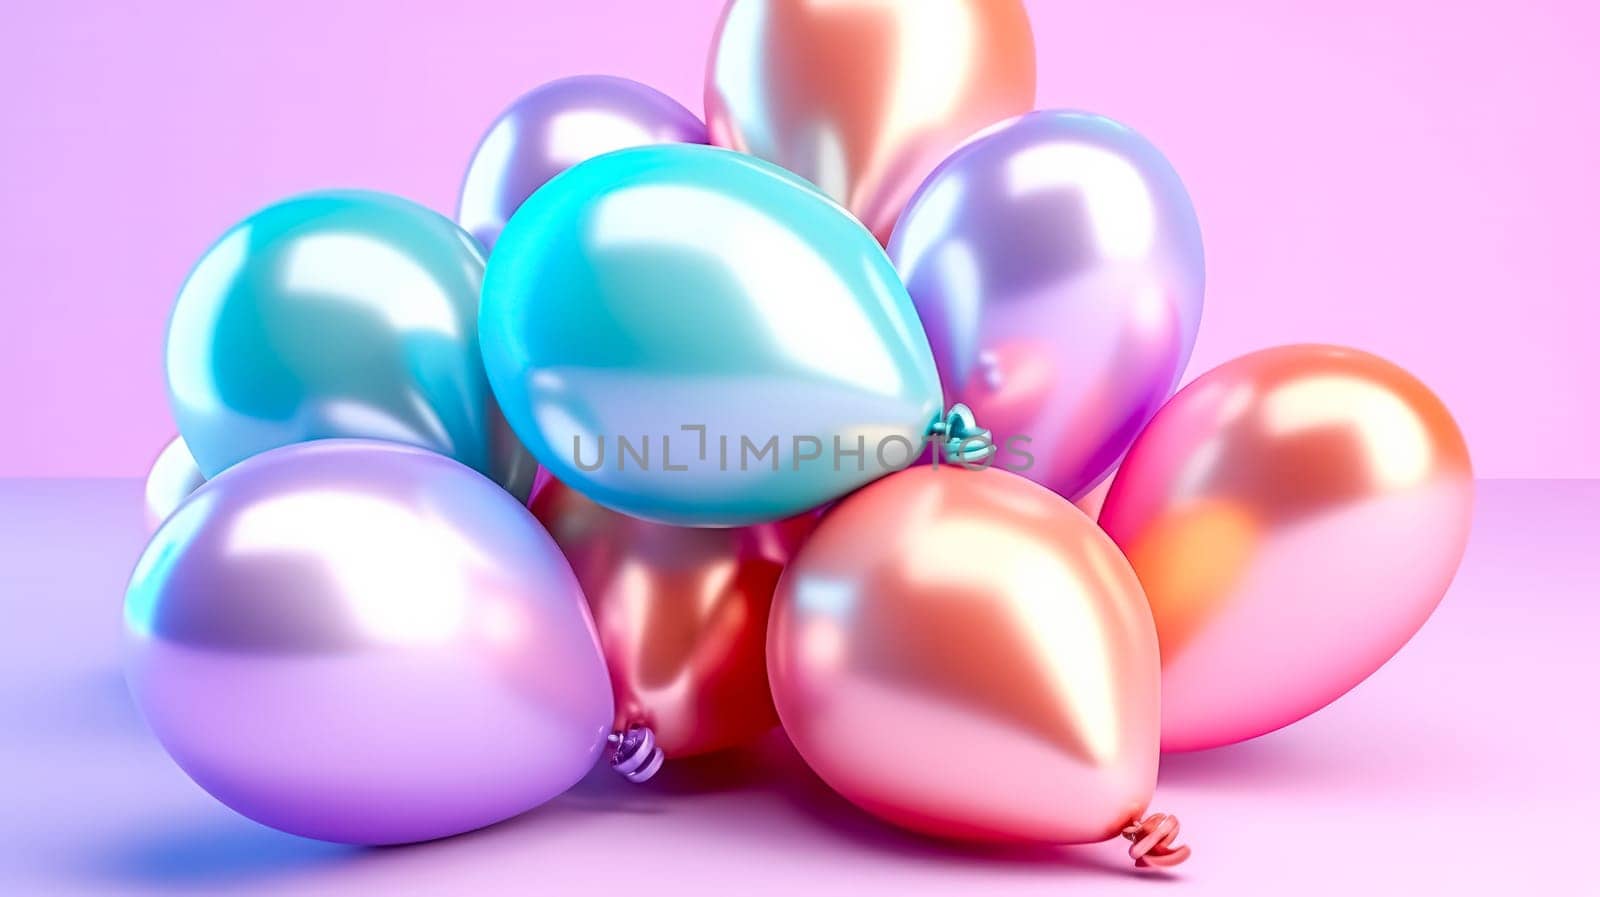 A vivid set of realistic matte helium balloons floats against a colorful blurred background. Ideal for birthday, party, wedding, or promotional designs.